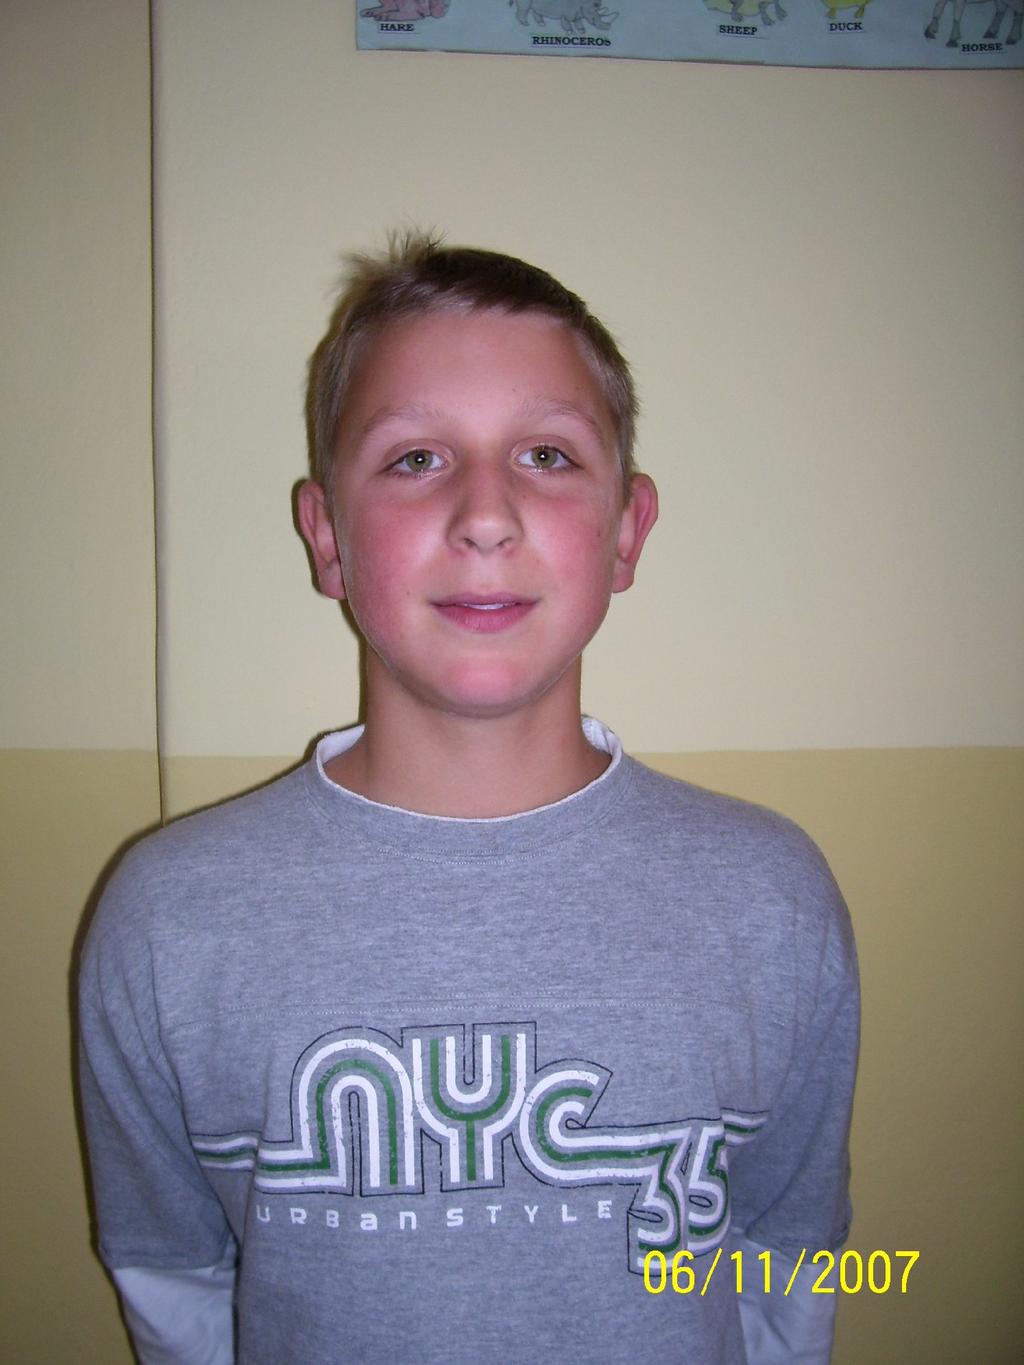 Hello! Hi! My name is Kacper my surname is Skapczyk I am 12 years old. I am in class 6a. My favourite sports are football and swimming. My favourite music bands are Verba and Mattafix.